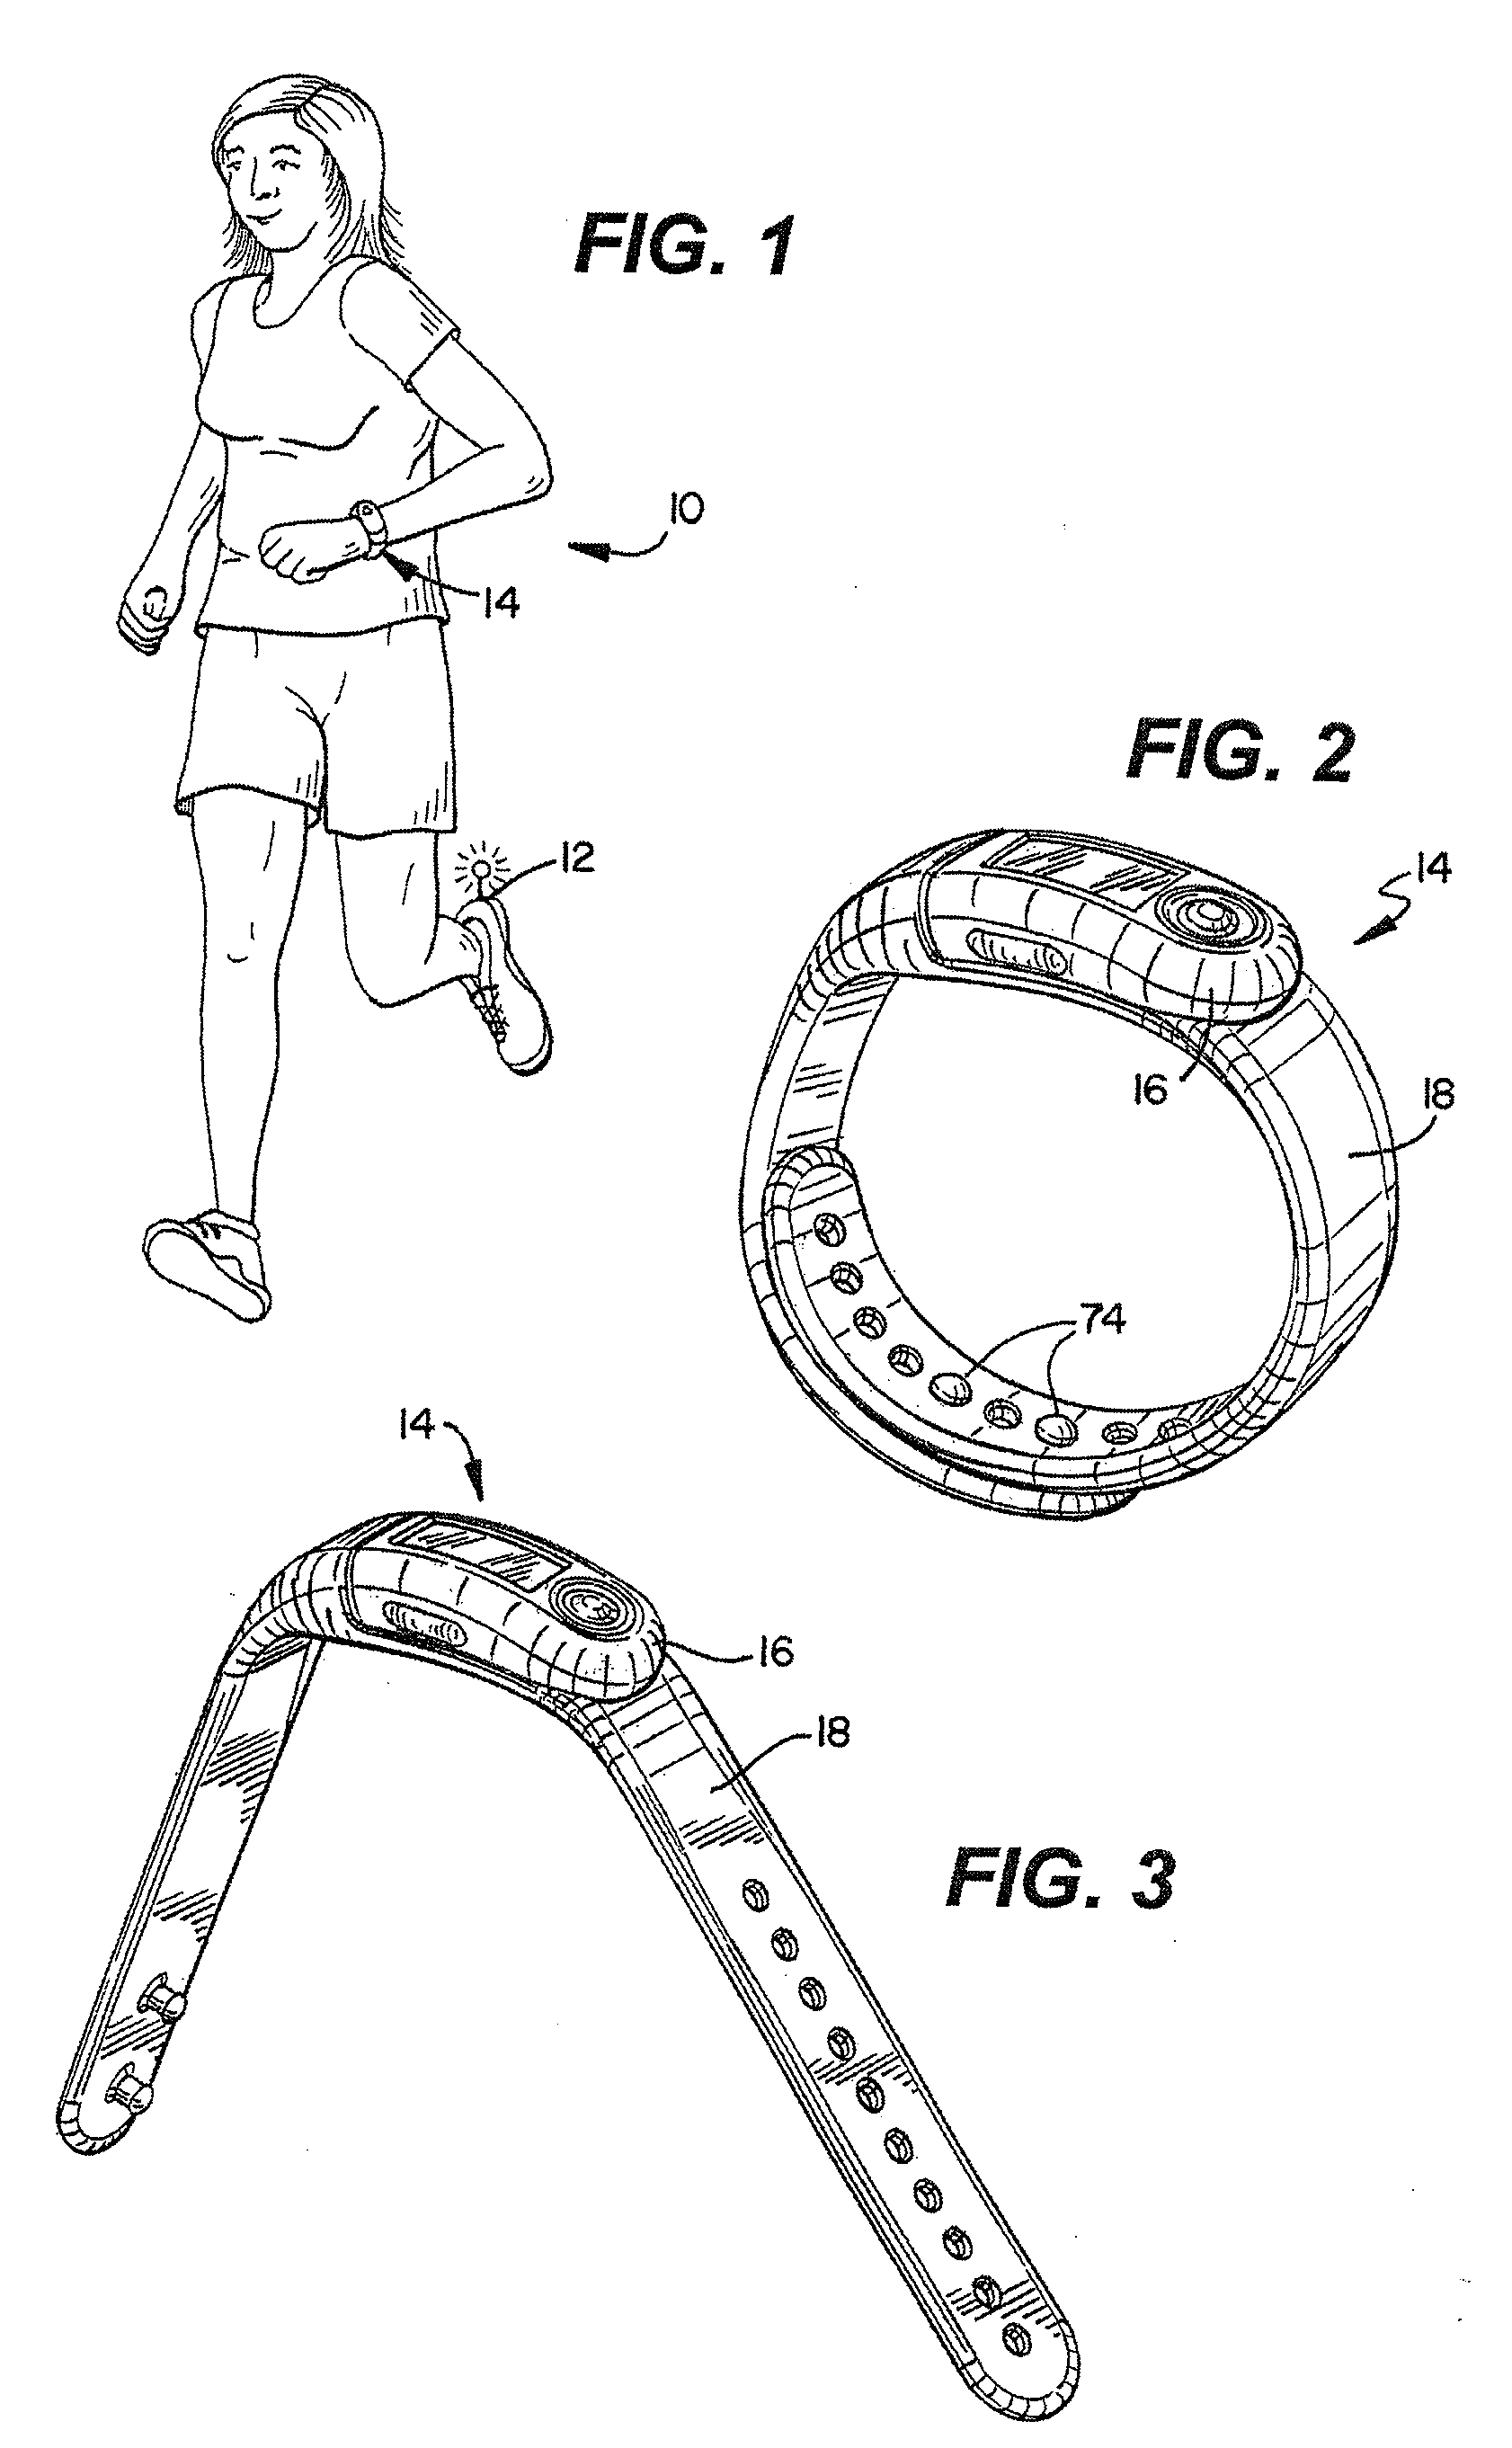 Wearable device assembly having athletic functionality